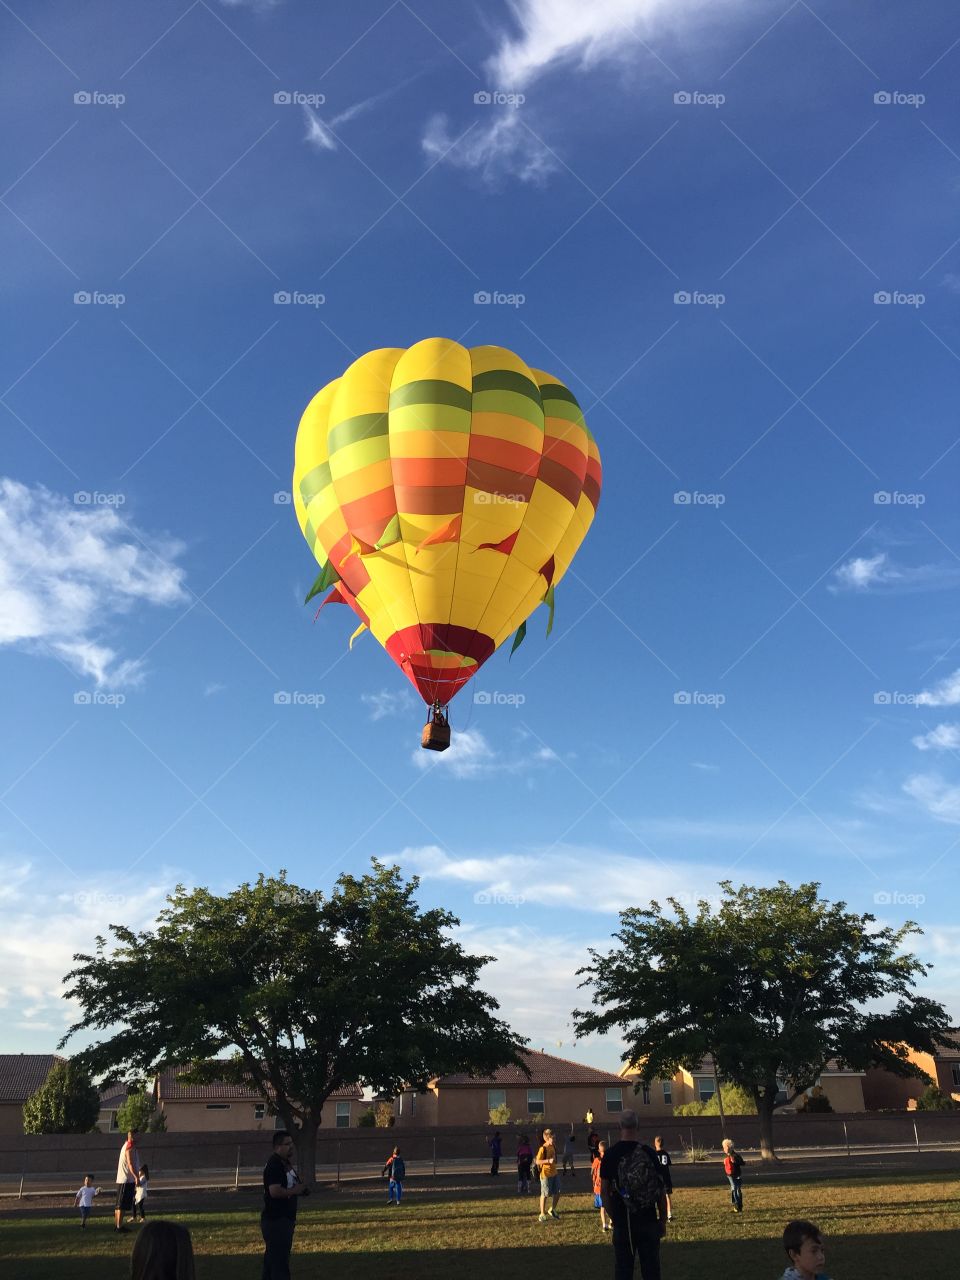 Albuquerque Balloons Aloft. Hot air balloons inflate and launch from schools all around Albuquerque to kick off Balloon Fiesta